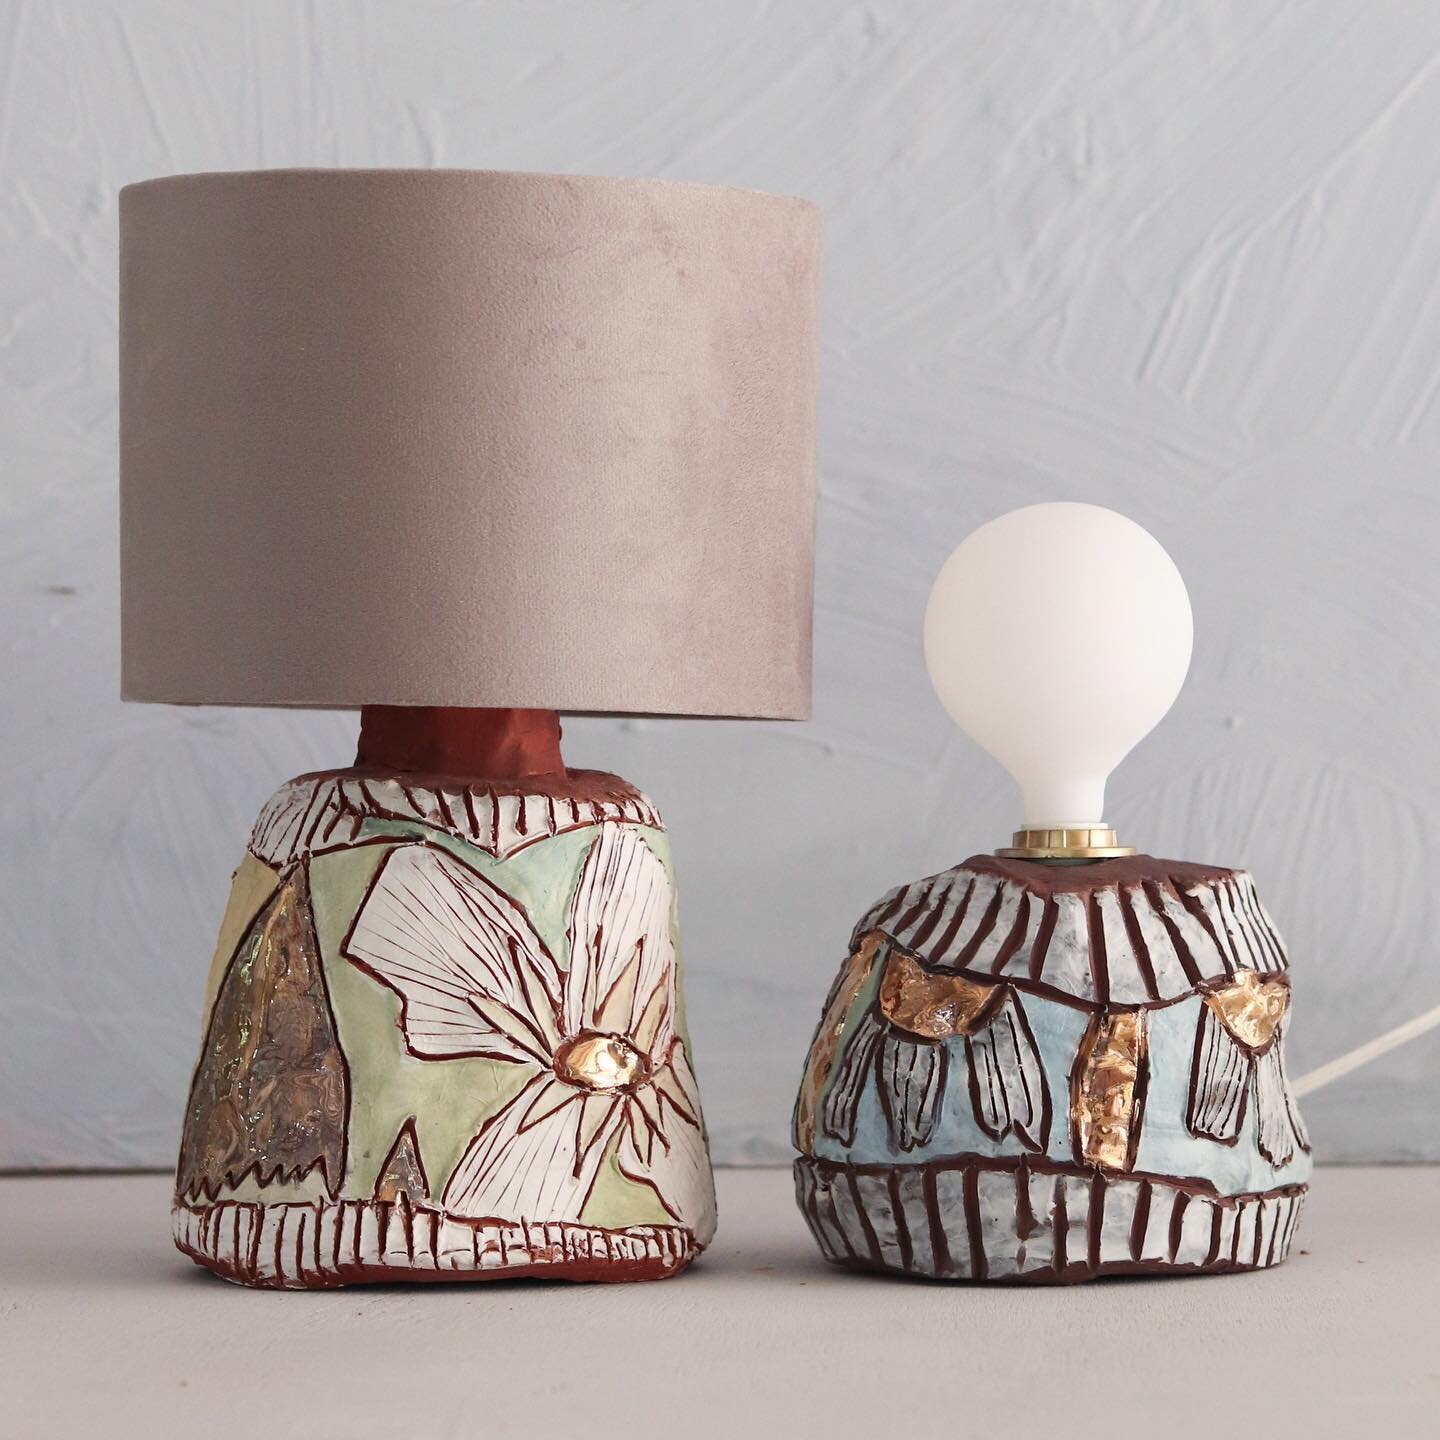 With or without the shades? I love making them them both ways. New ceramic lamps available next weekend, click to set a reminder 💛